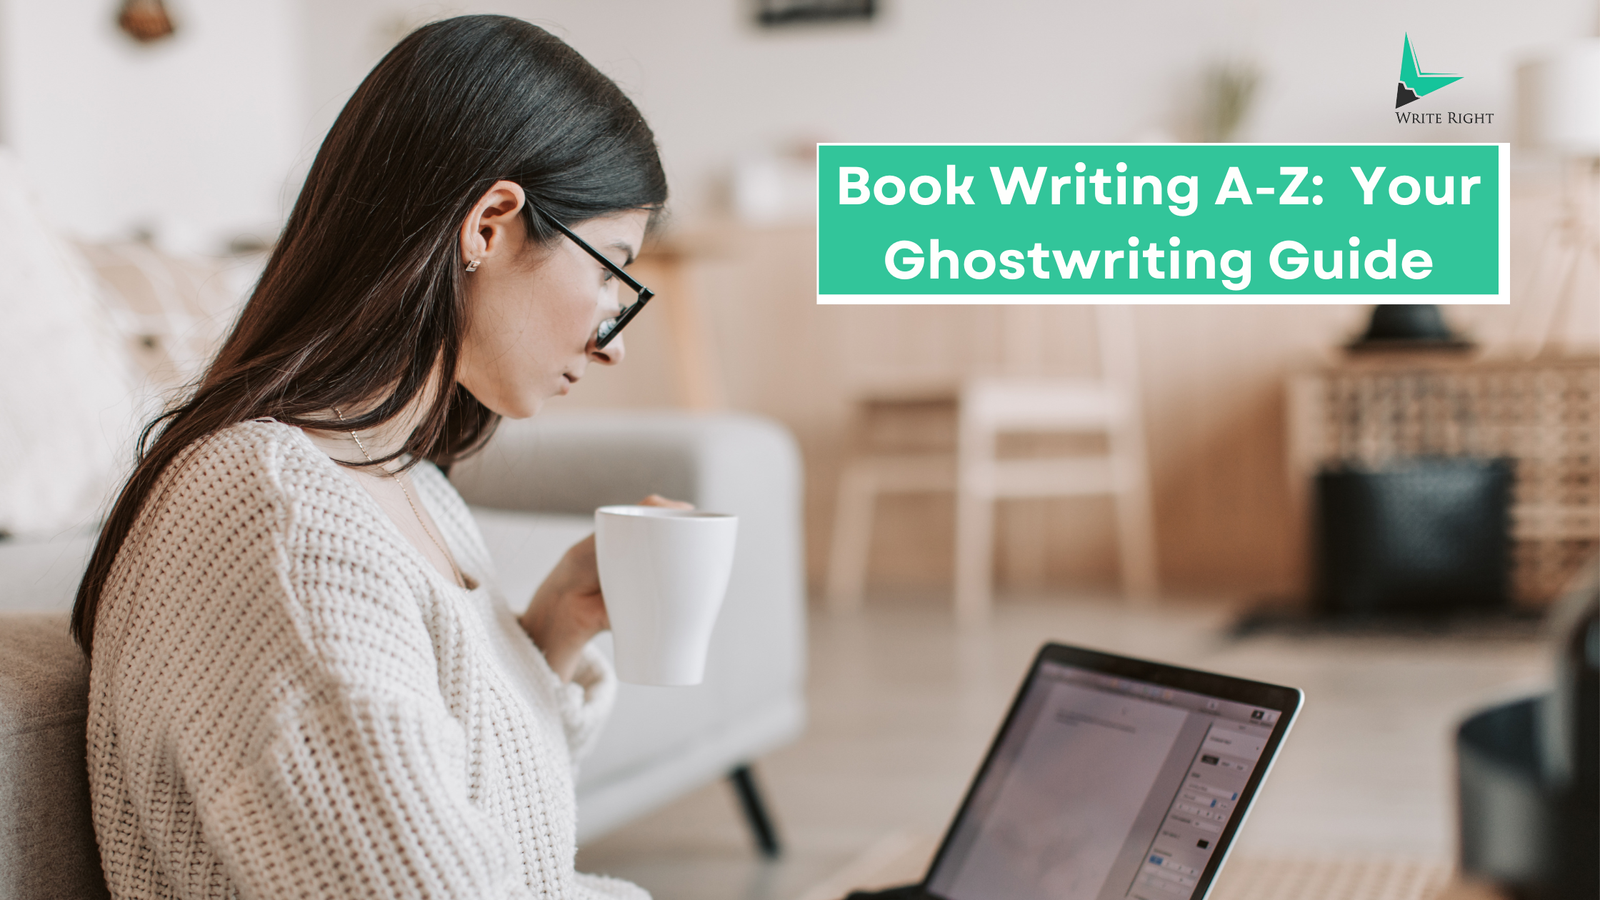 What is ghostwriting? Ghostwriting meaning? Here's your Complete Ghostwriting Guide and Book writing guide.